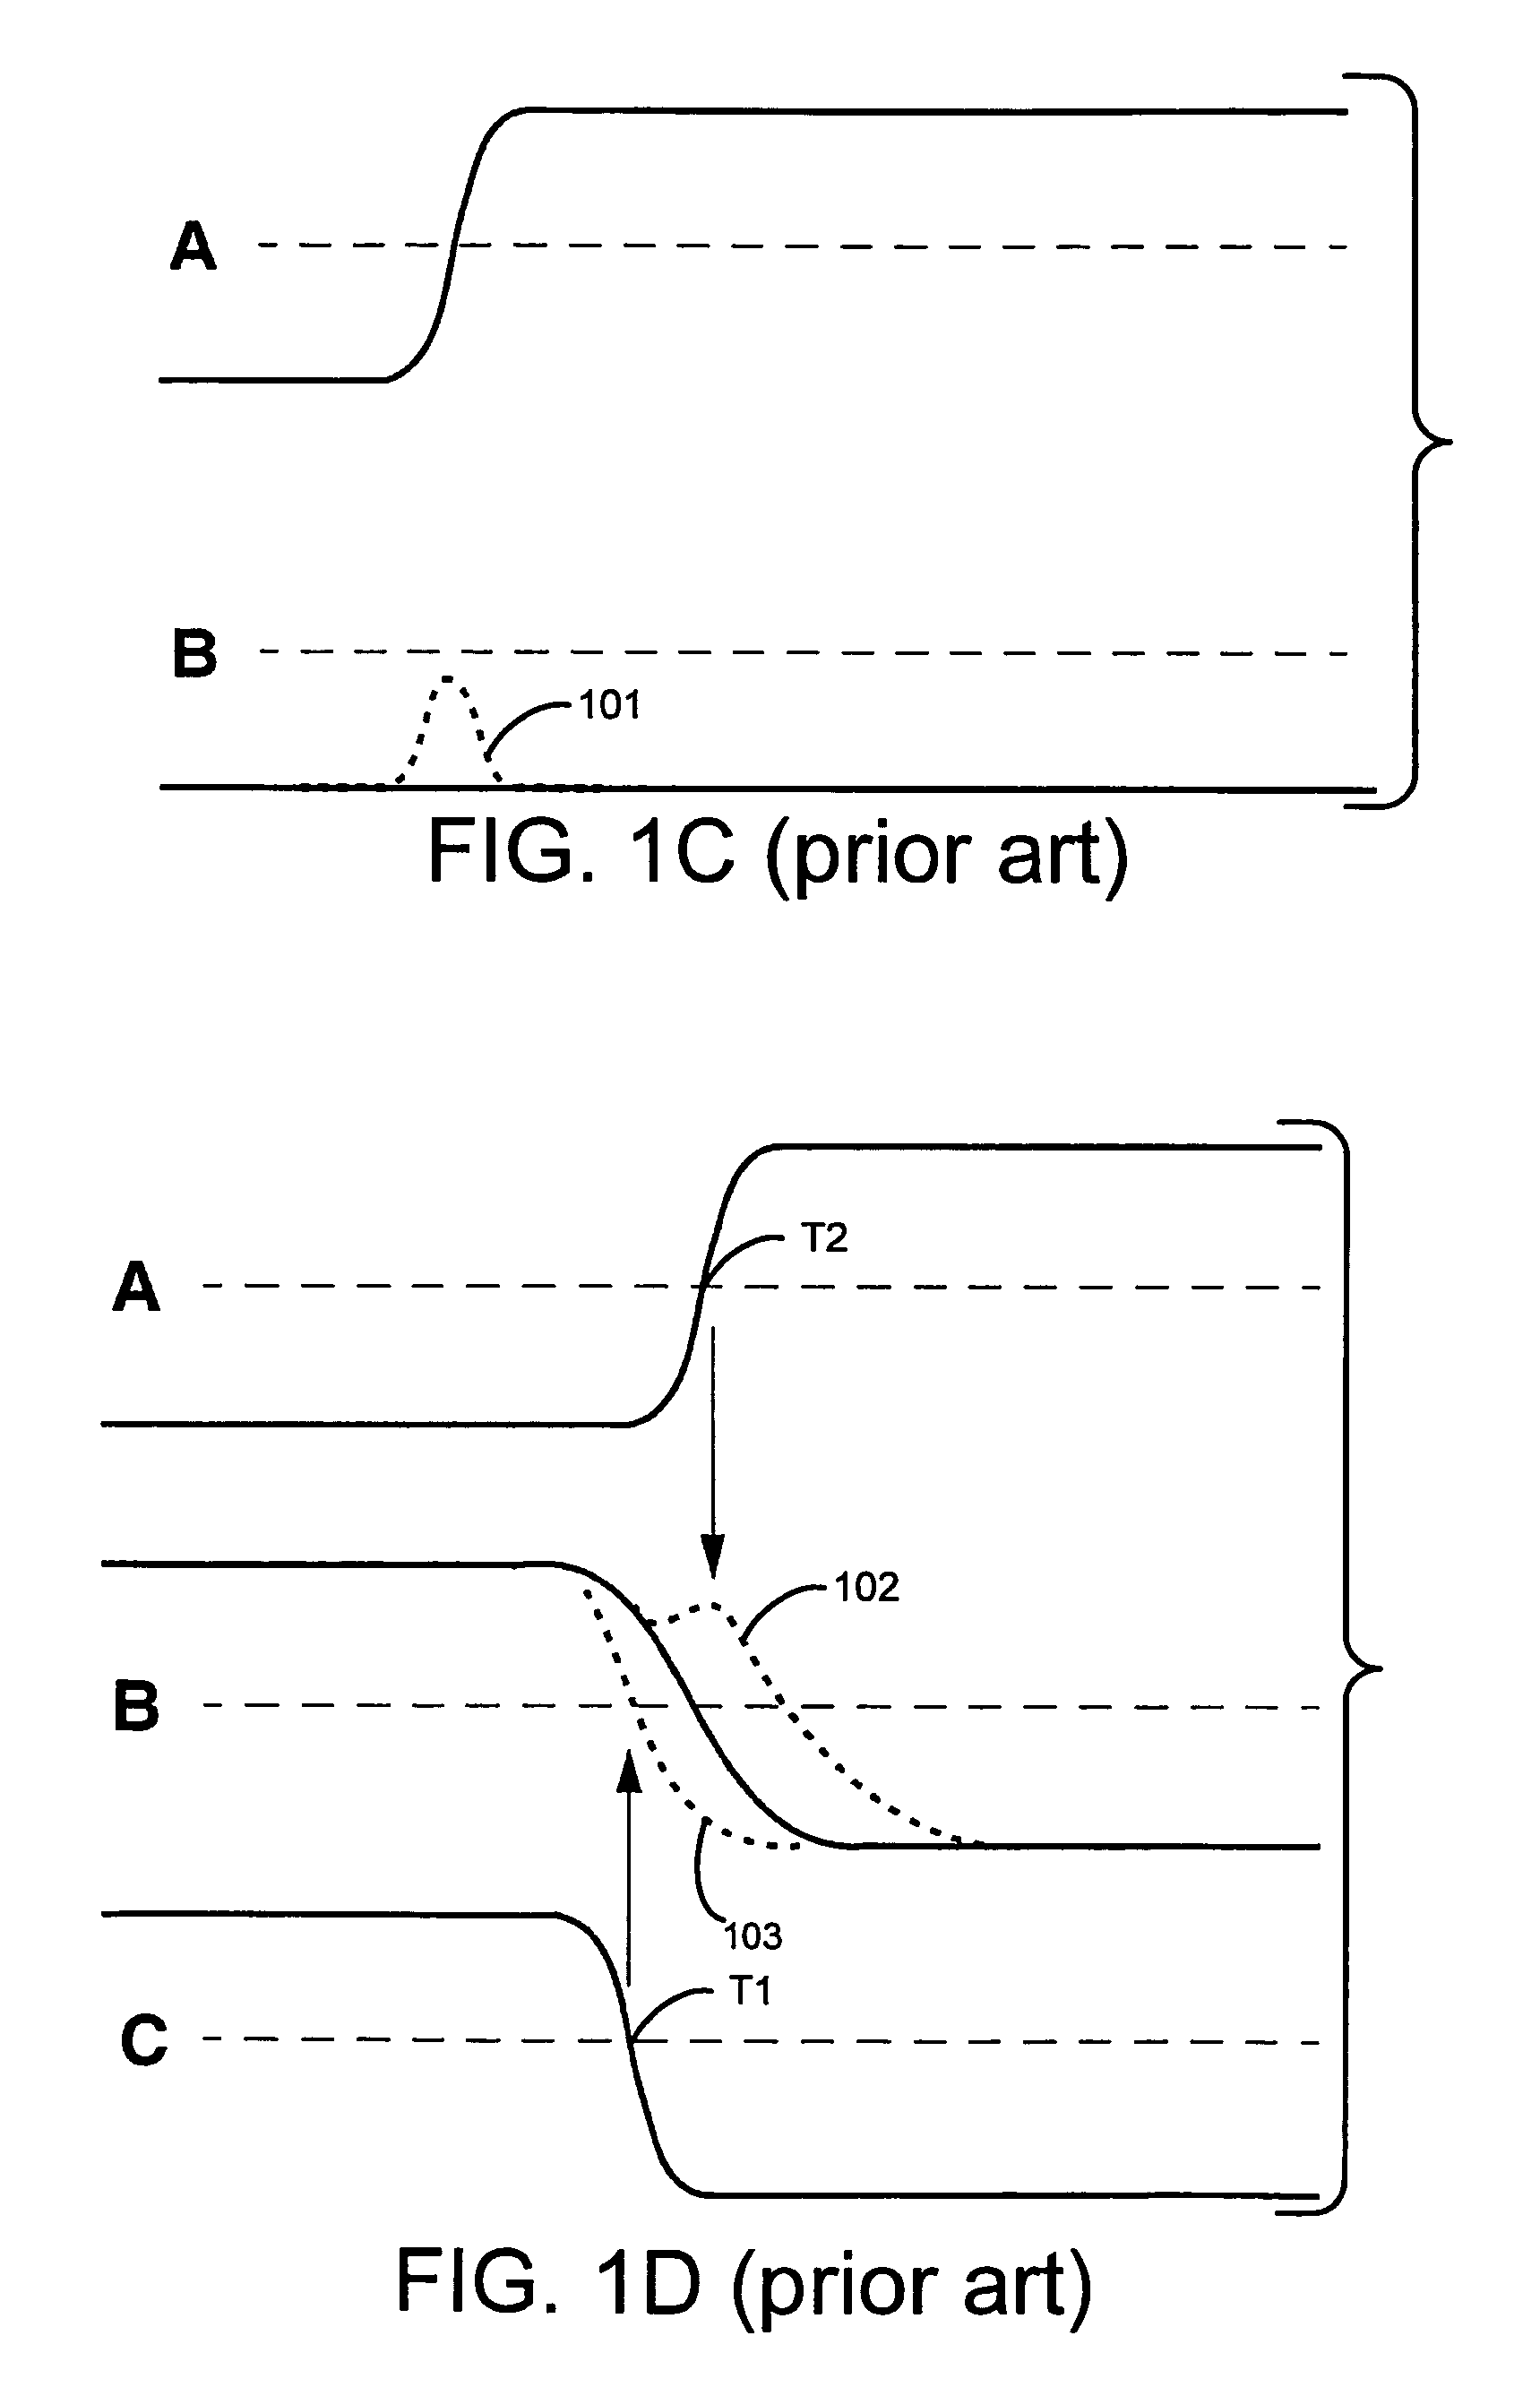 Generation of engineering change order (ECO) constraints for use in selecting ECO repair techniques